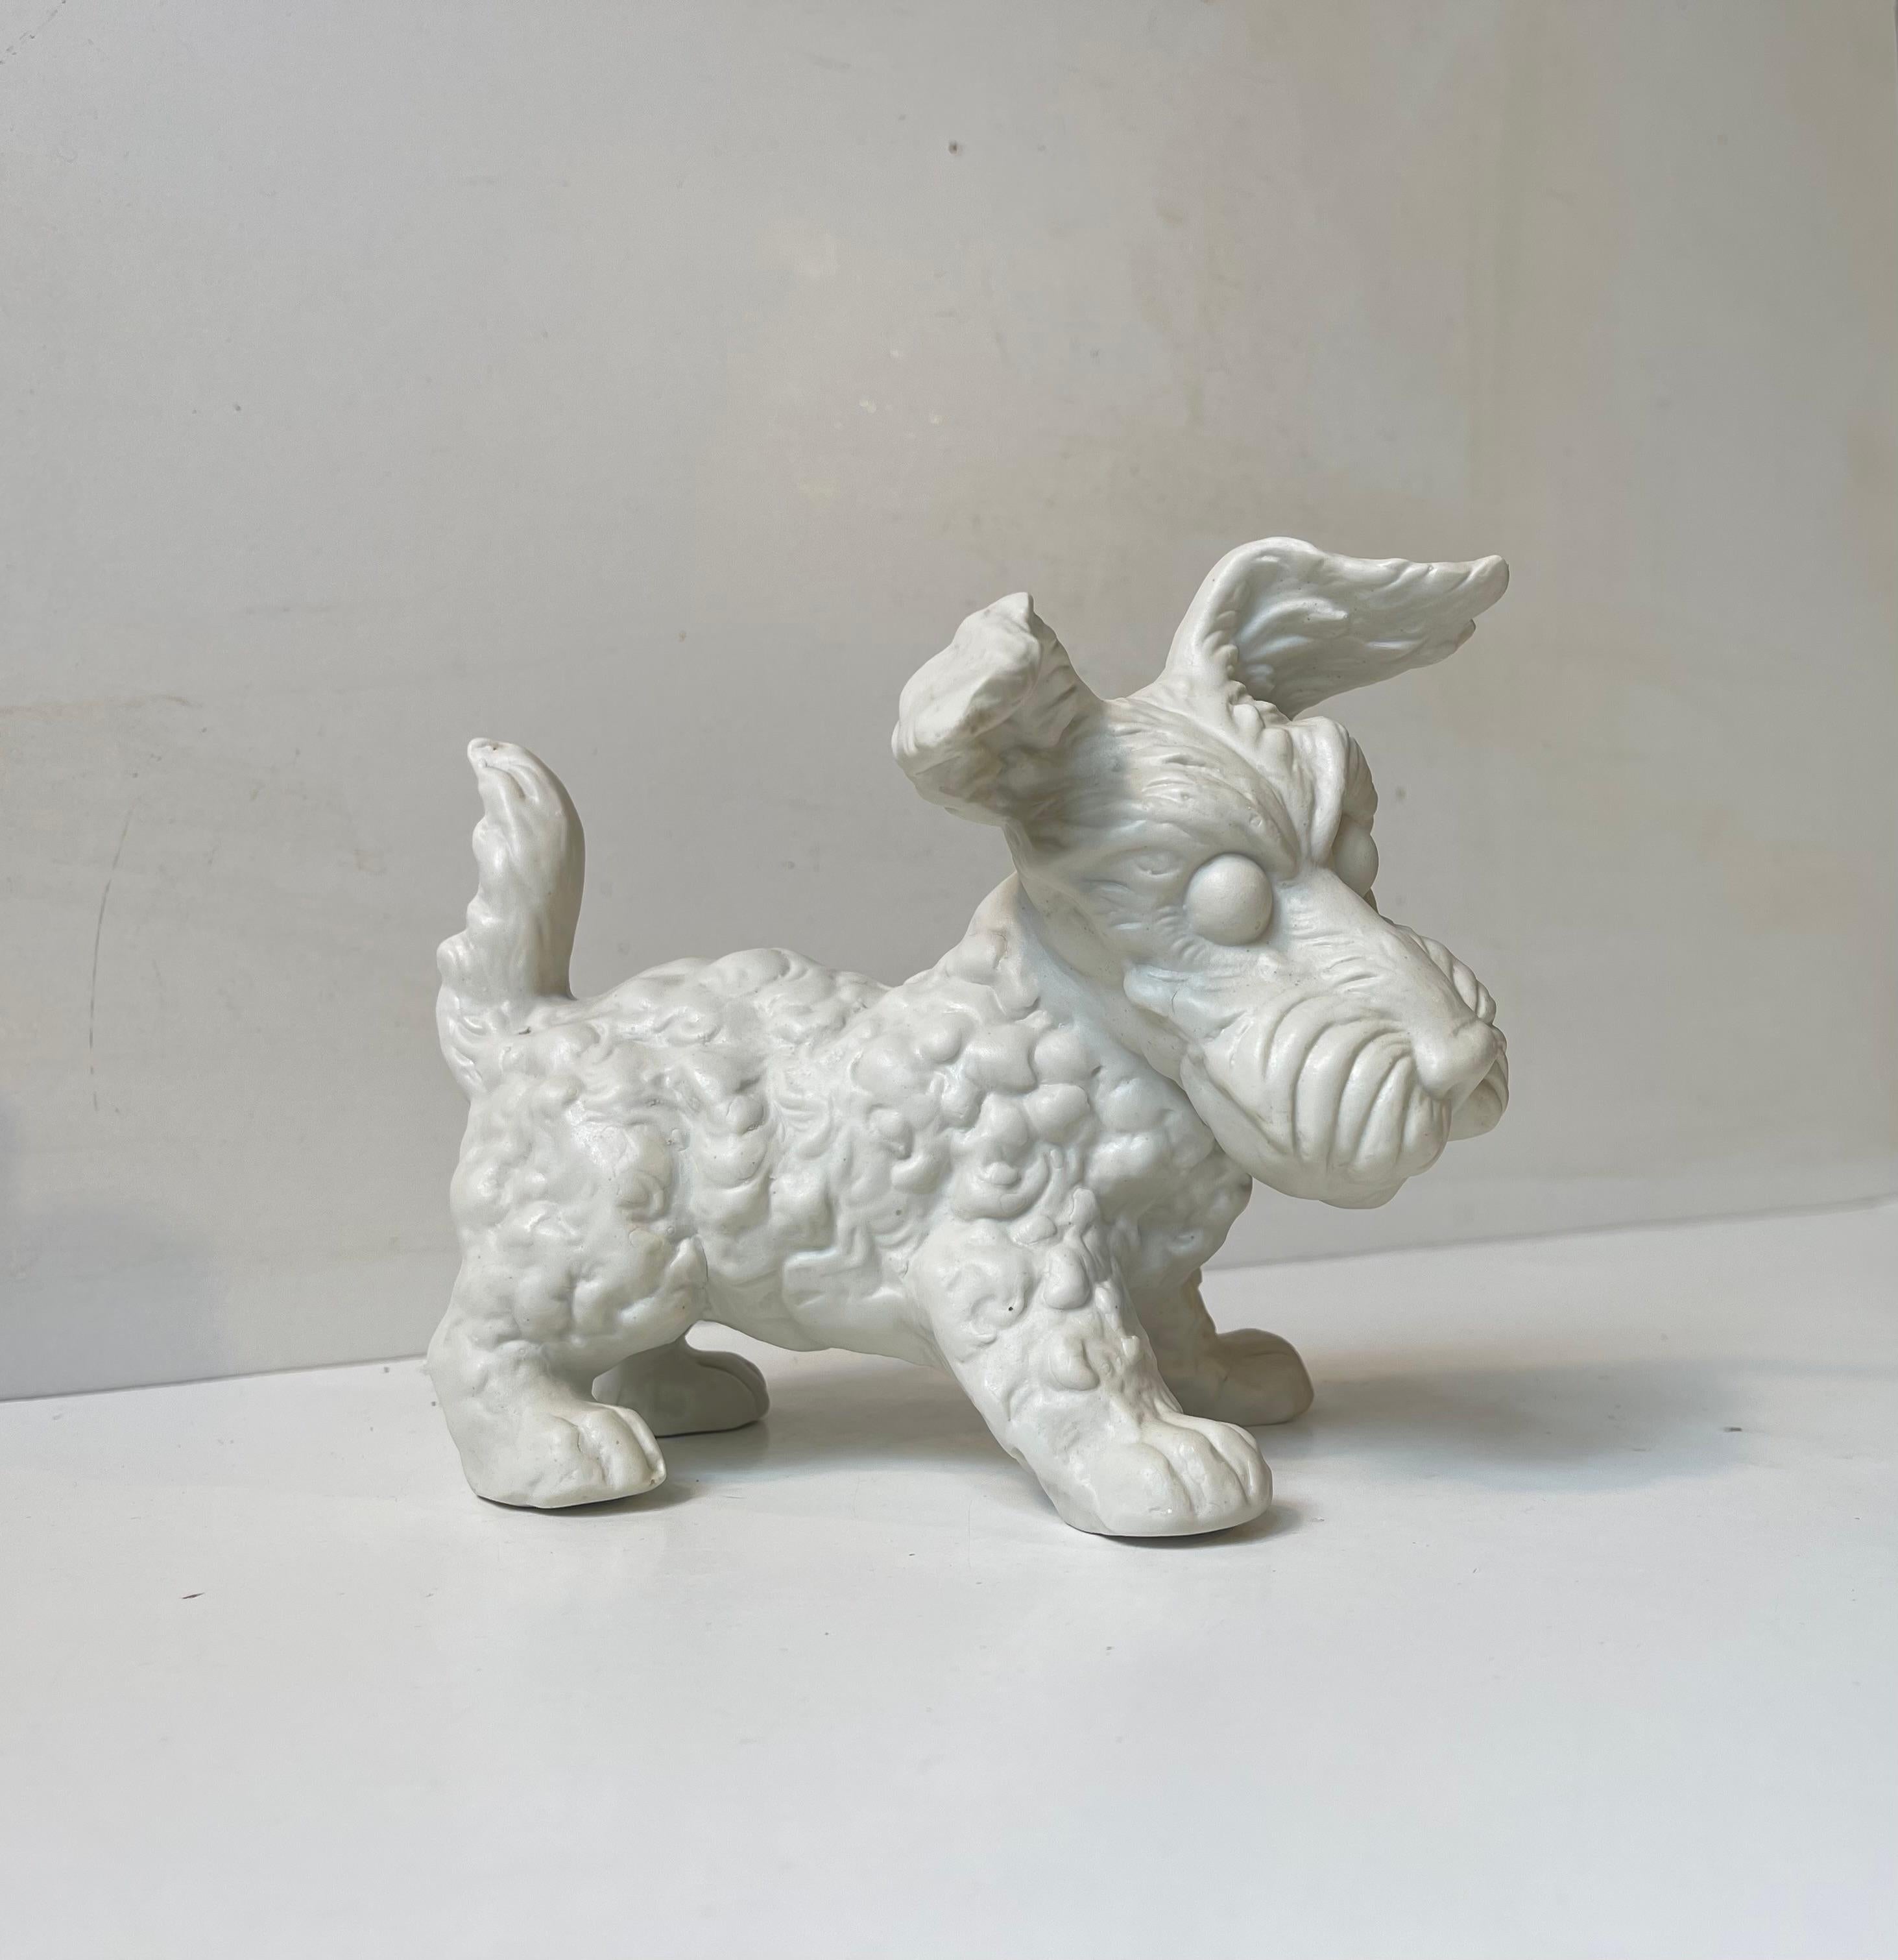 Lifelike figurine of a white Scottish terrier/Aberdeen Terrier. Its executed and molded in white bisque porcelain. This is the large size by Schaubach Kunst in Germany - circa 1950-60. Measurements: 17x11x14 cm.

Free World wide express shipping.